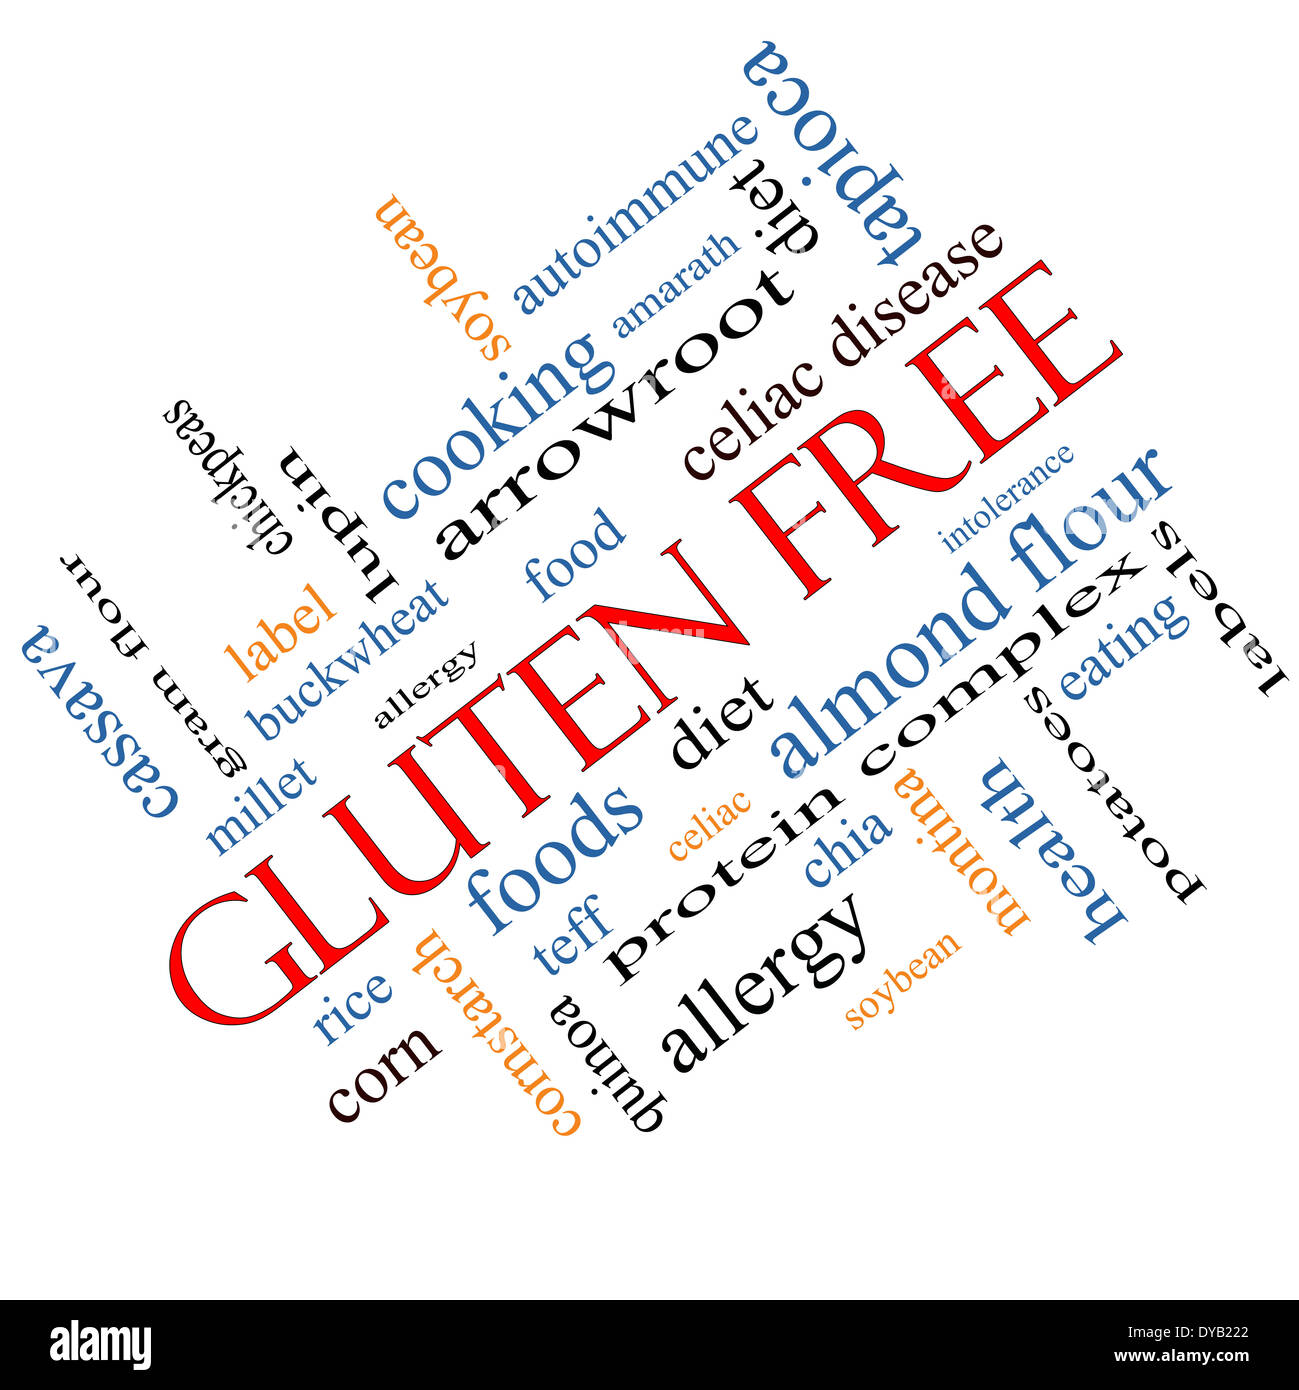 Gluten Free Word Cloud Concept angled with great terms such as food, allergy, diet and more. Stock Photo